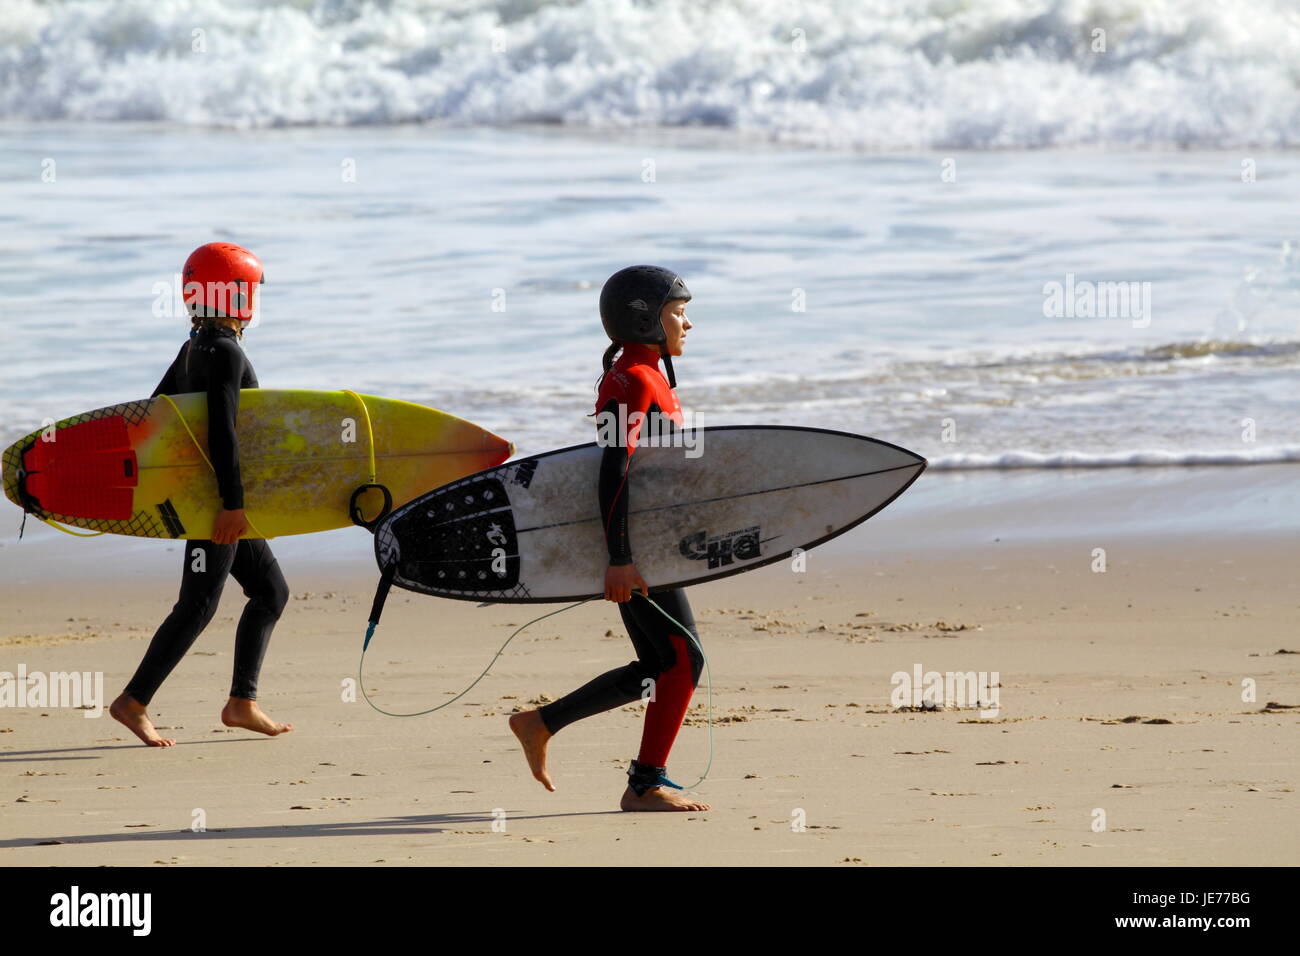 Two young preteen surfer girls going surfing Stock Photo